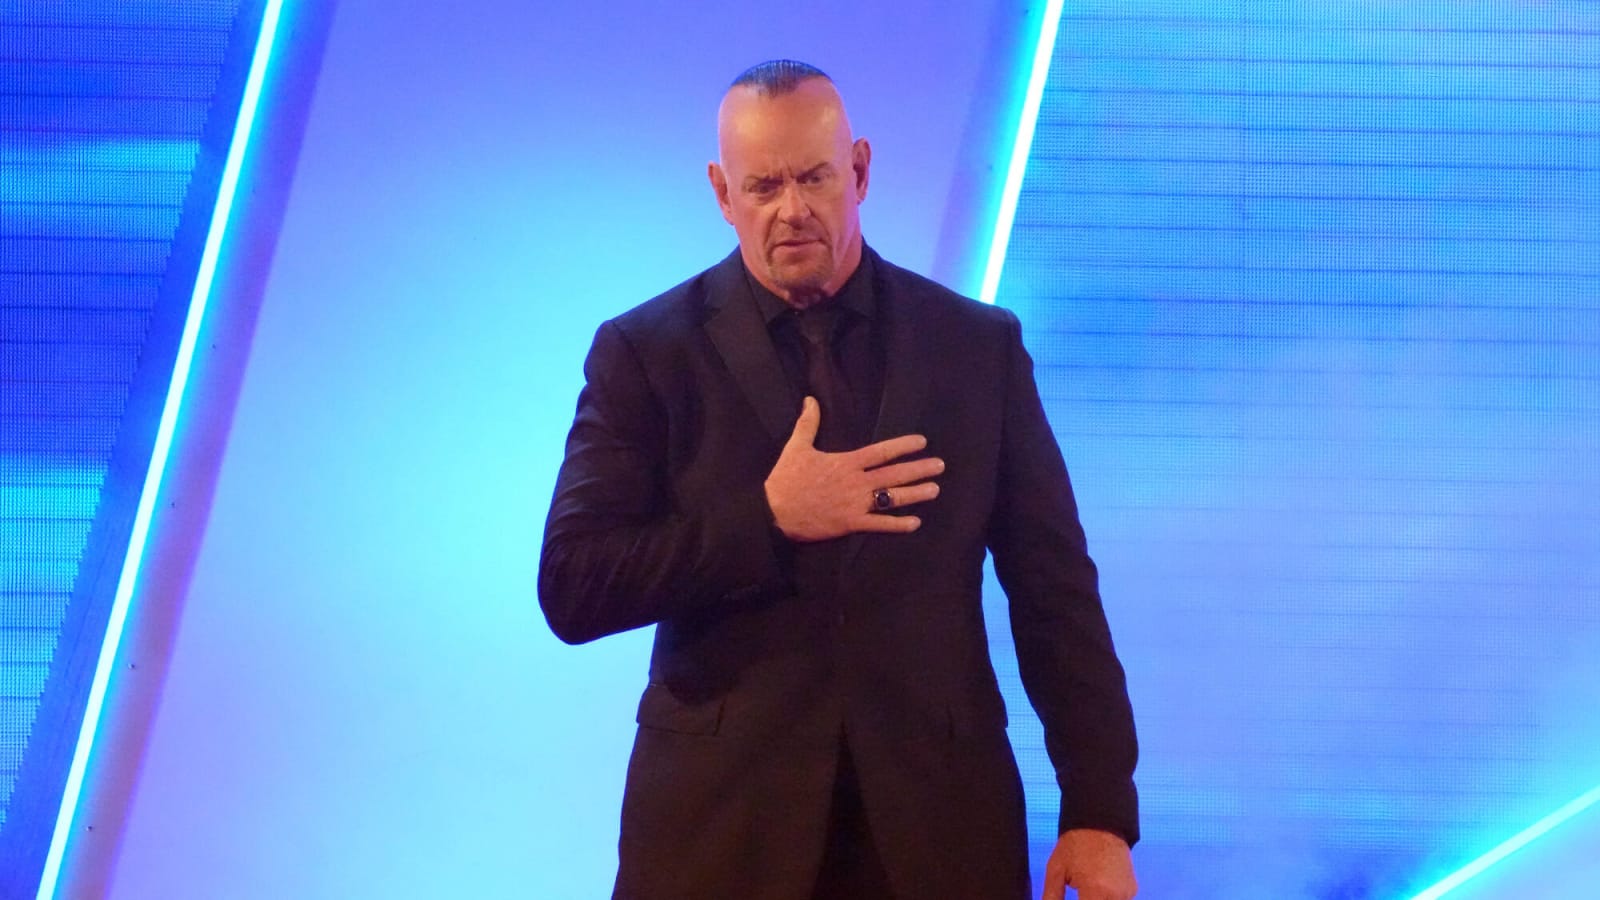 'I had lost it,' The Undertaker had to be stopped by people backstage after he attacked his opponent for real and walked out of a match